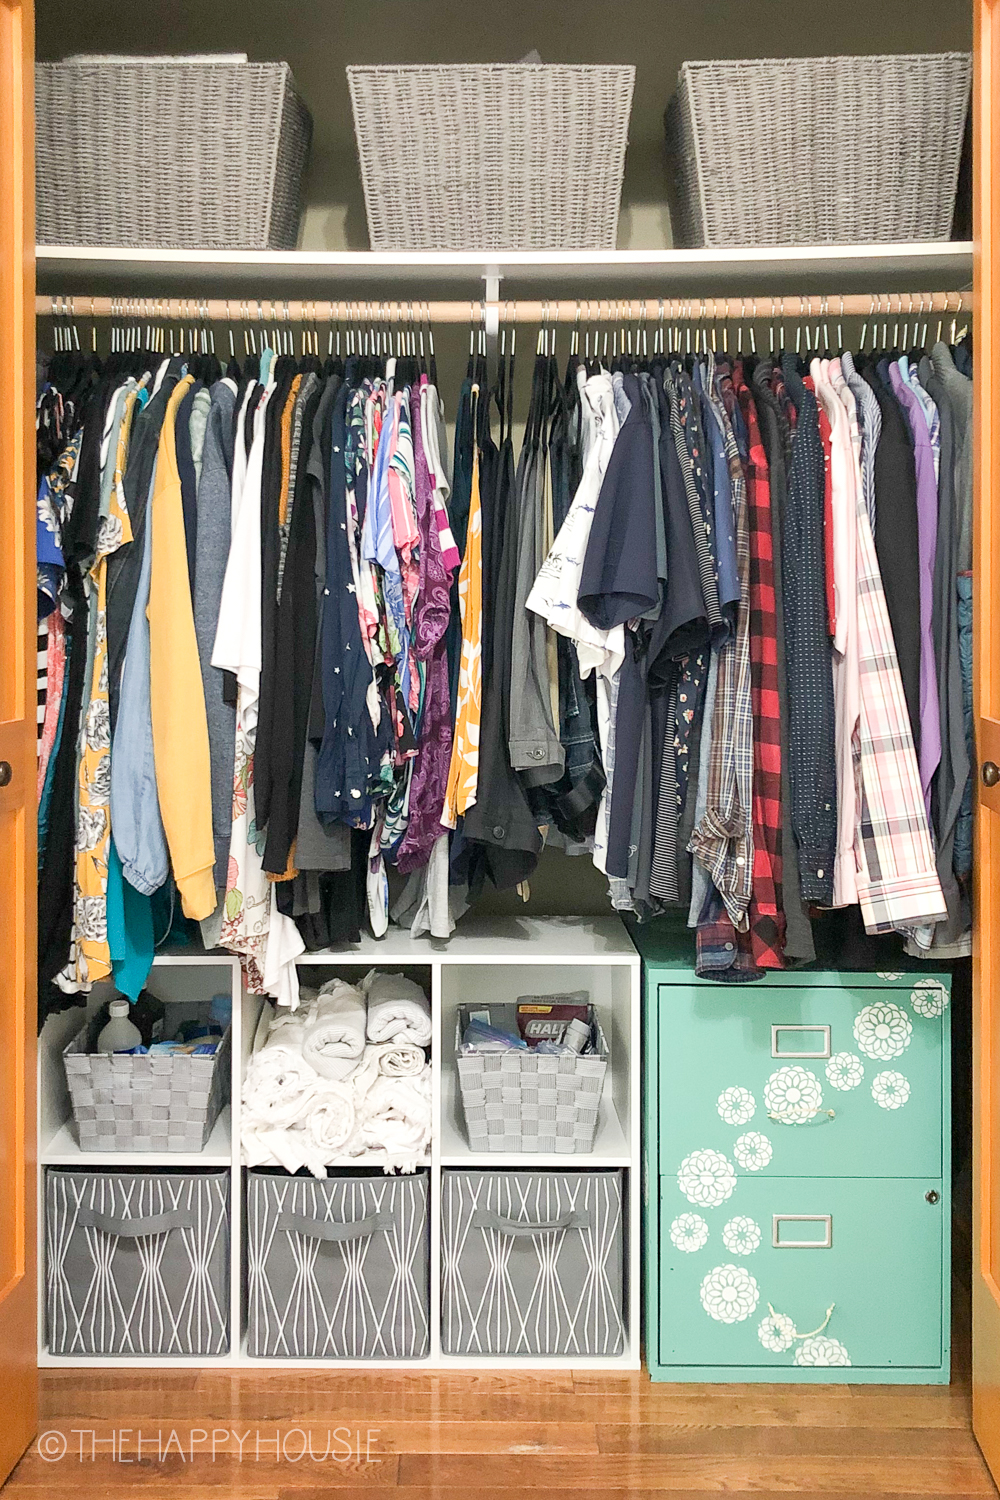 https://www.thehappyhousie.com/wp-content/uploads/2020/08/how-to-organize-a-small-reach-in-closet-for-multi-purpose-storage-5.jpg